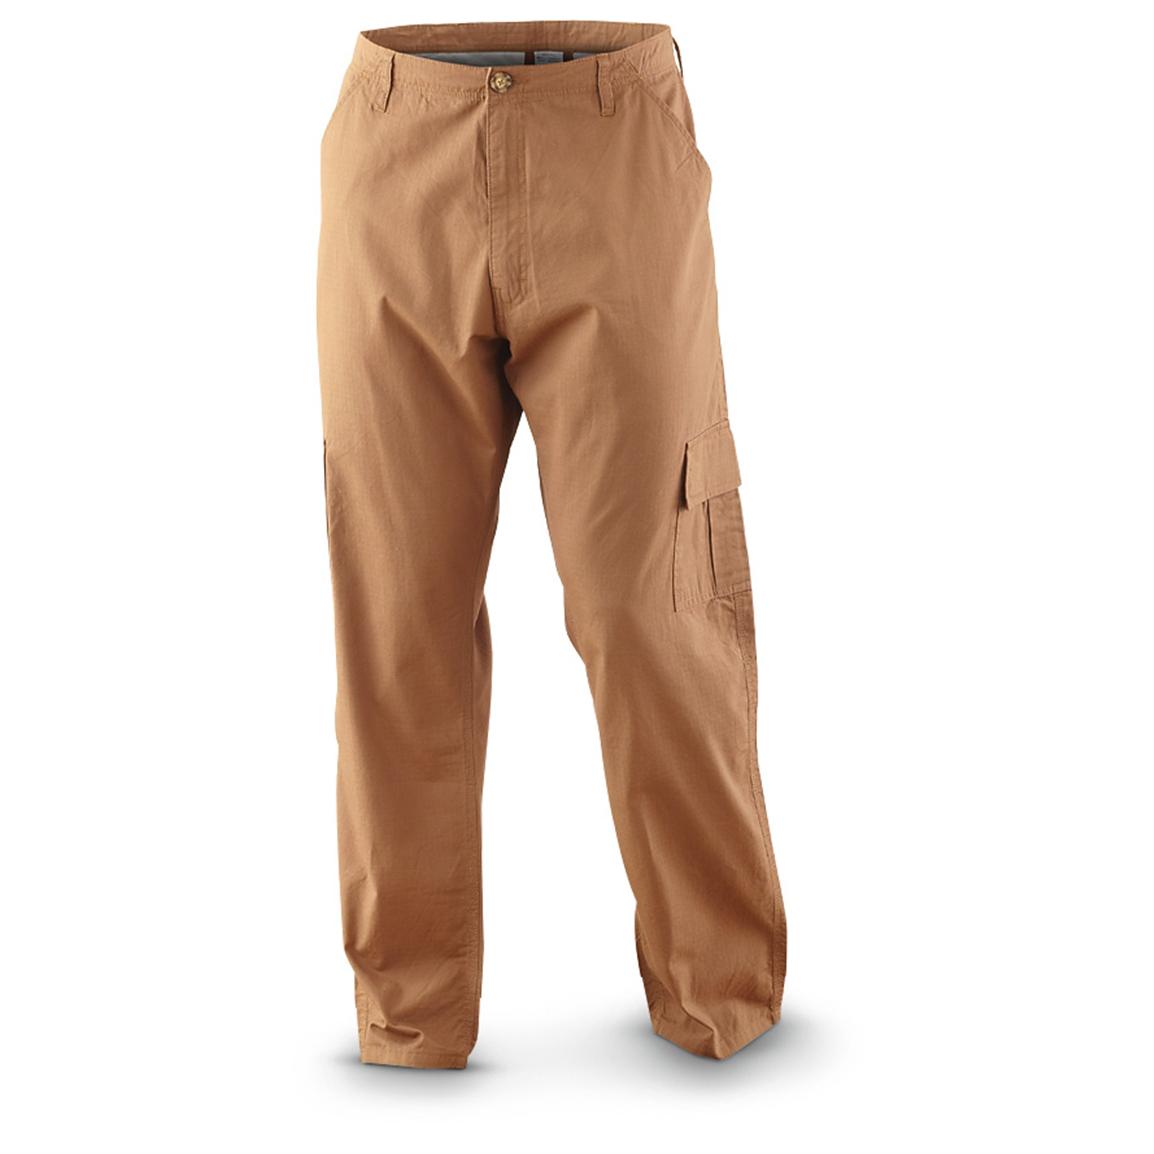 Key® Ripstop Cargo Pants - 594038, Jeans & Pants at Sportsman's Guide